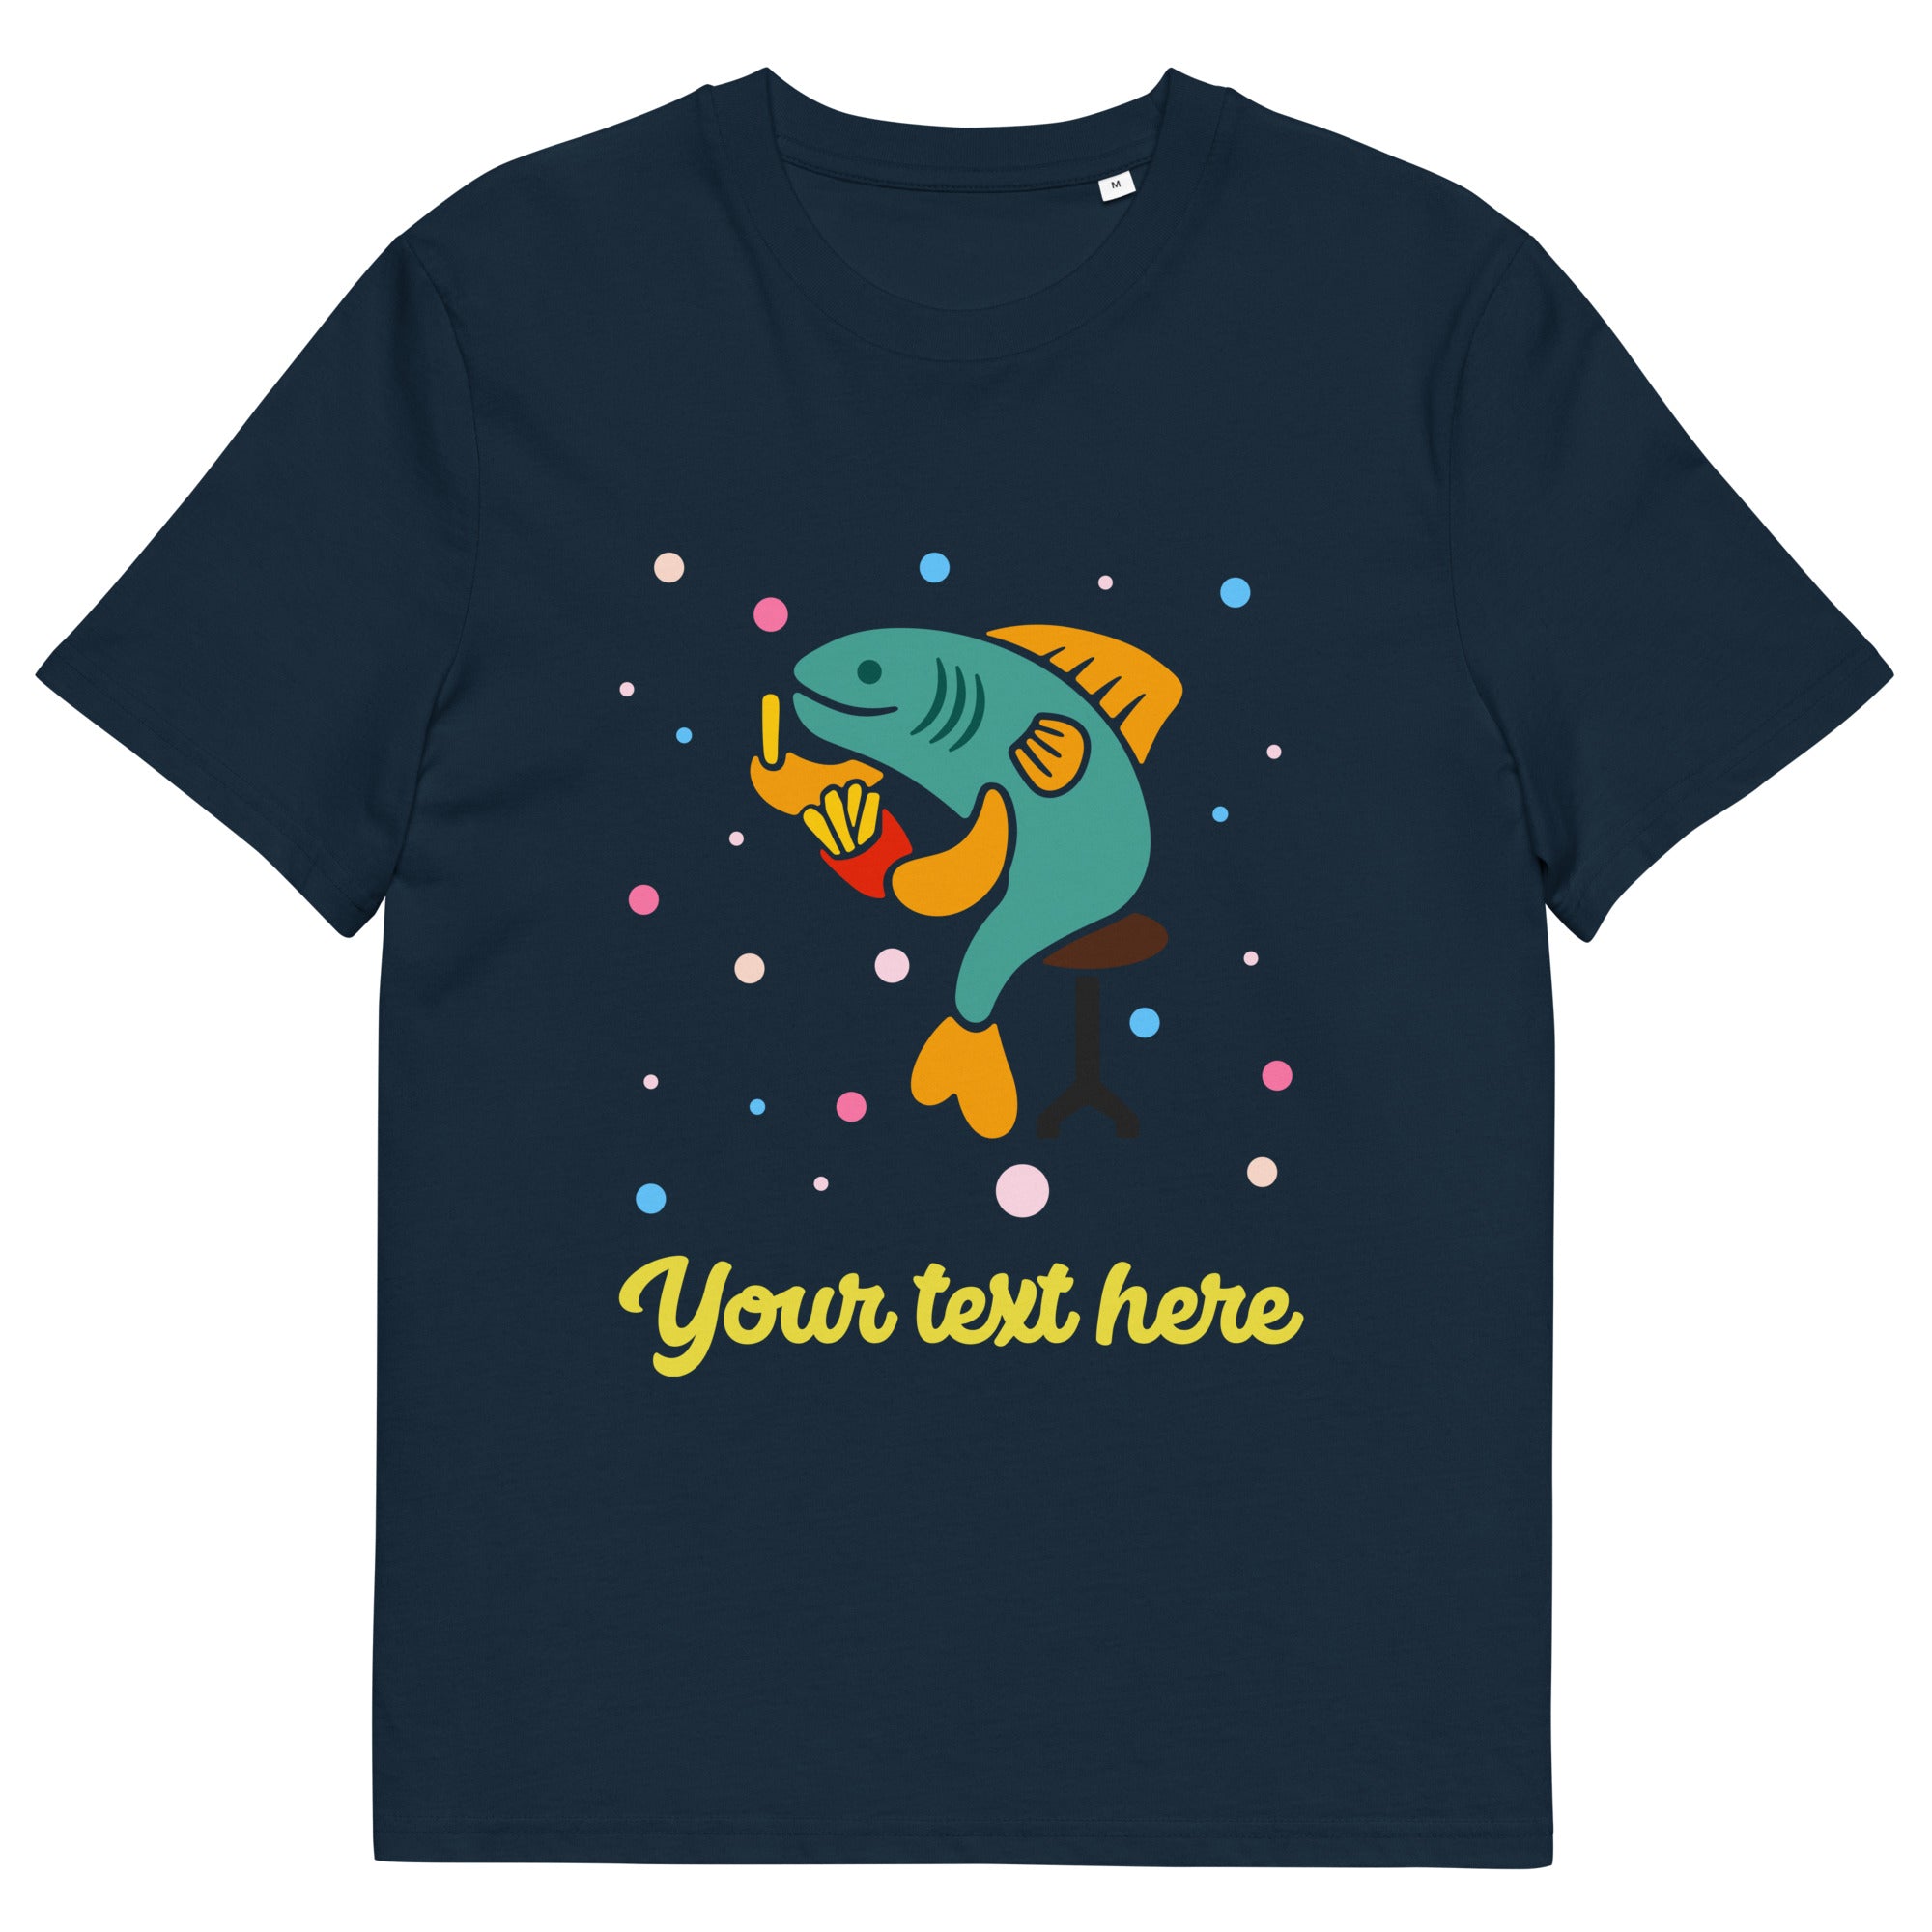 Personalised Custom Text - Organic Cotton Adults Unisex T-Shirt - London Doodles - Fish & Chips - Navy